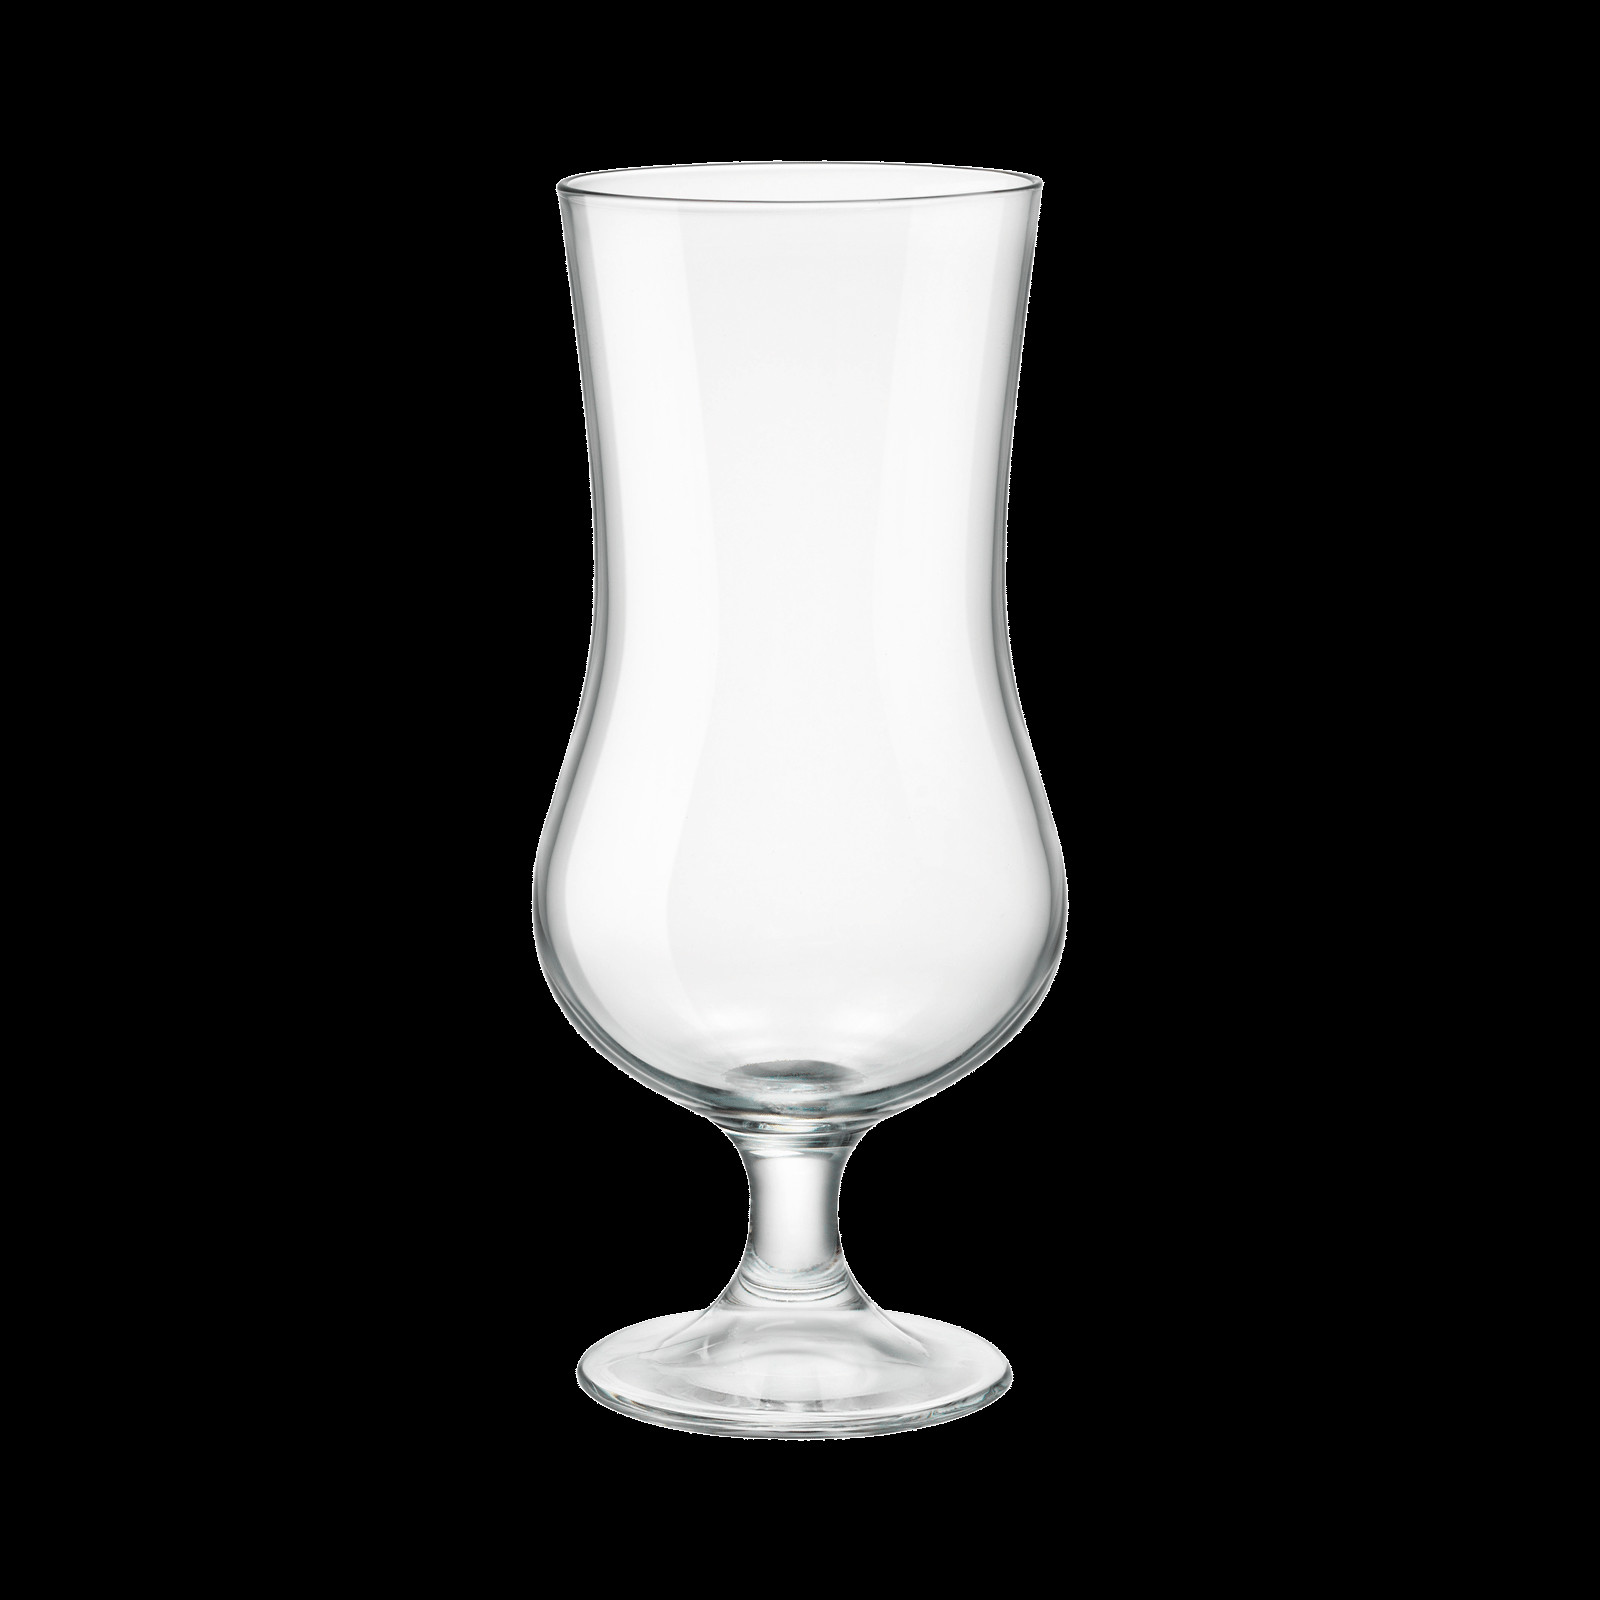 27 Recommended Large Square Glass Vase 2024 free download large square glass vase of archivi products bormioli rocco inside large beer glass